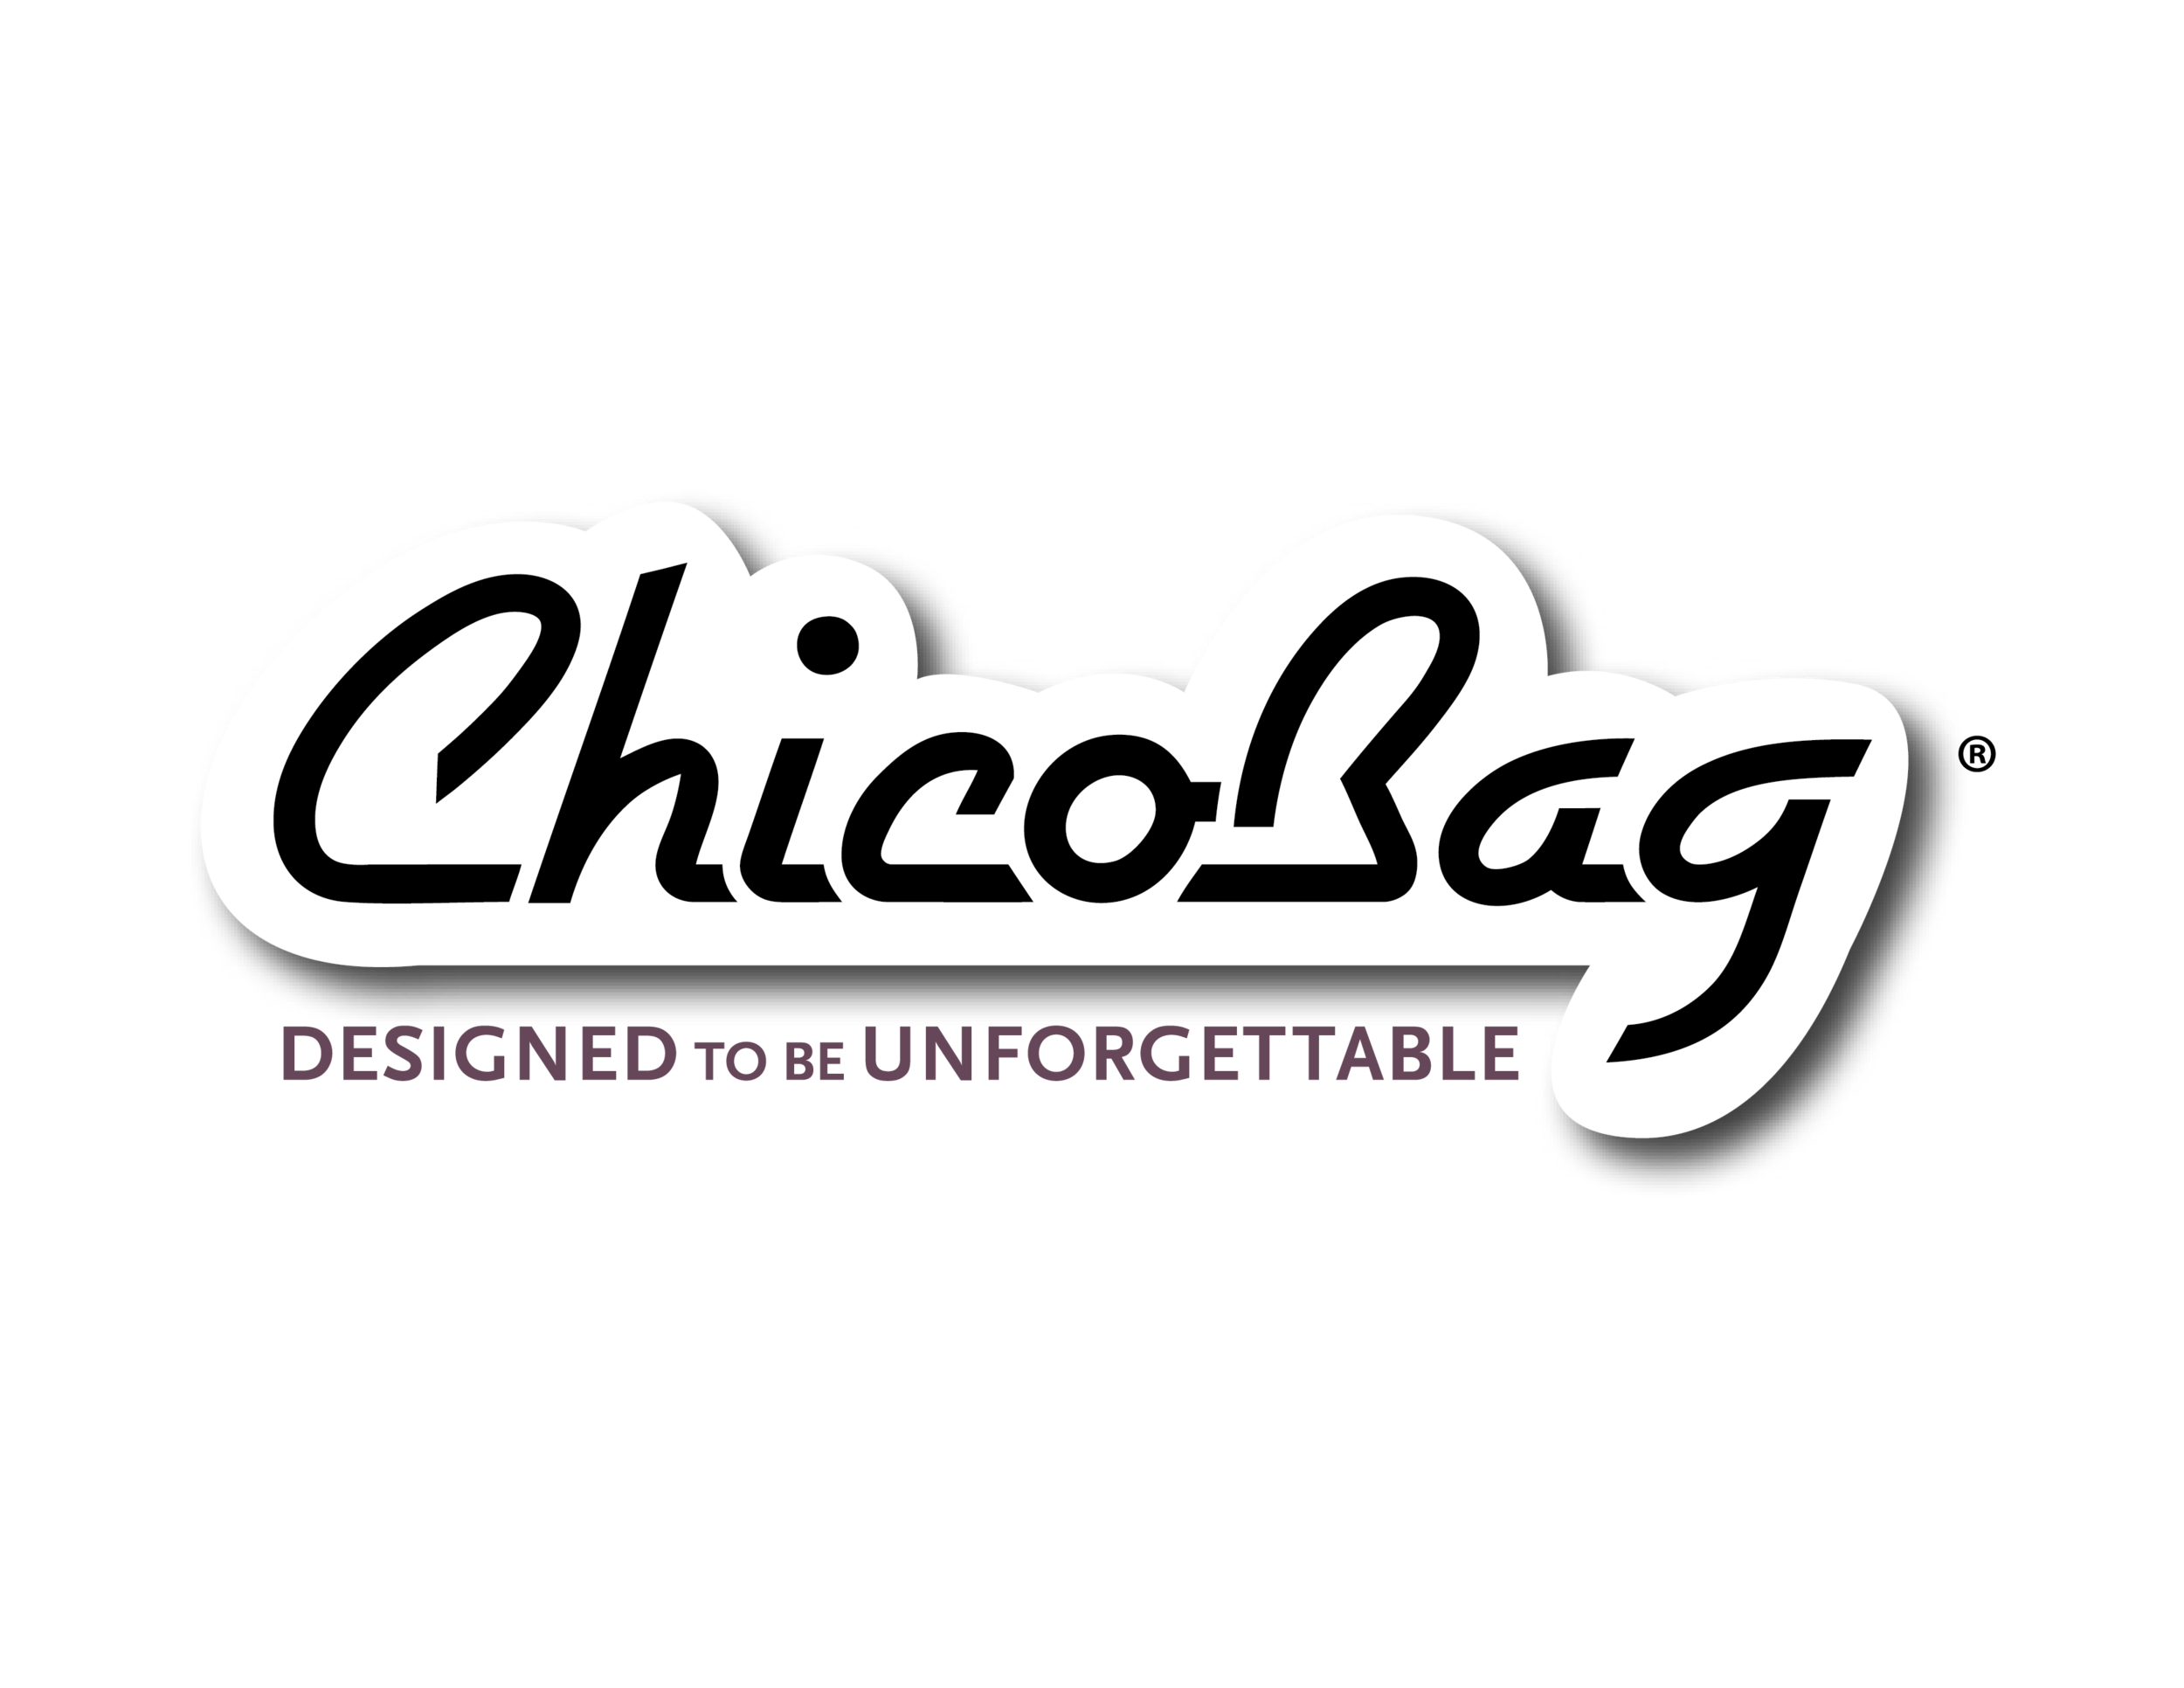 Set of 3 reusable sandwich bags from Chico Bags